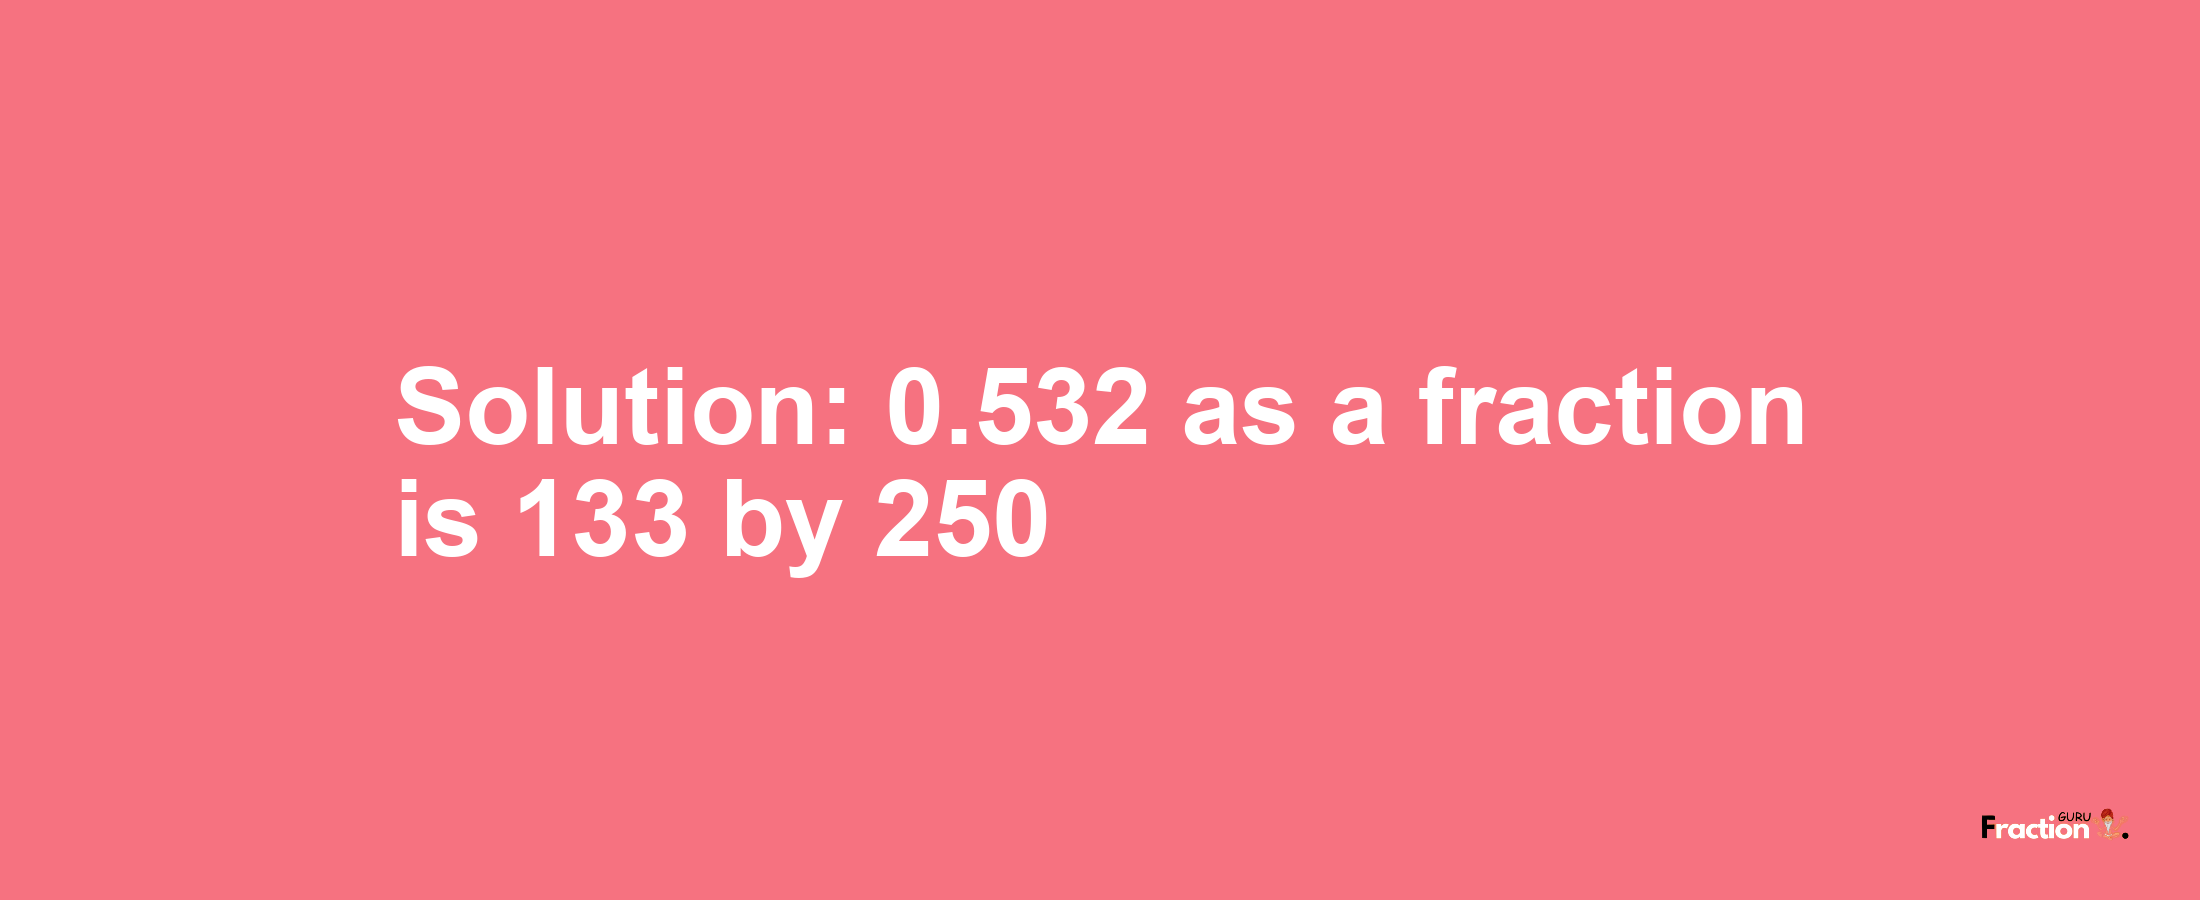 Solution:0.532 as a fraction is 133/250